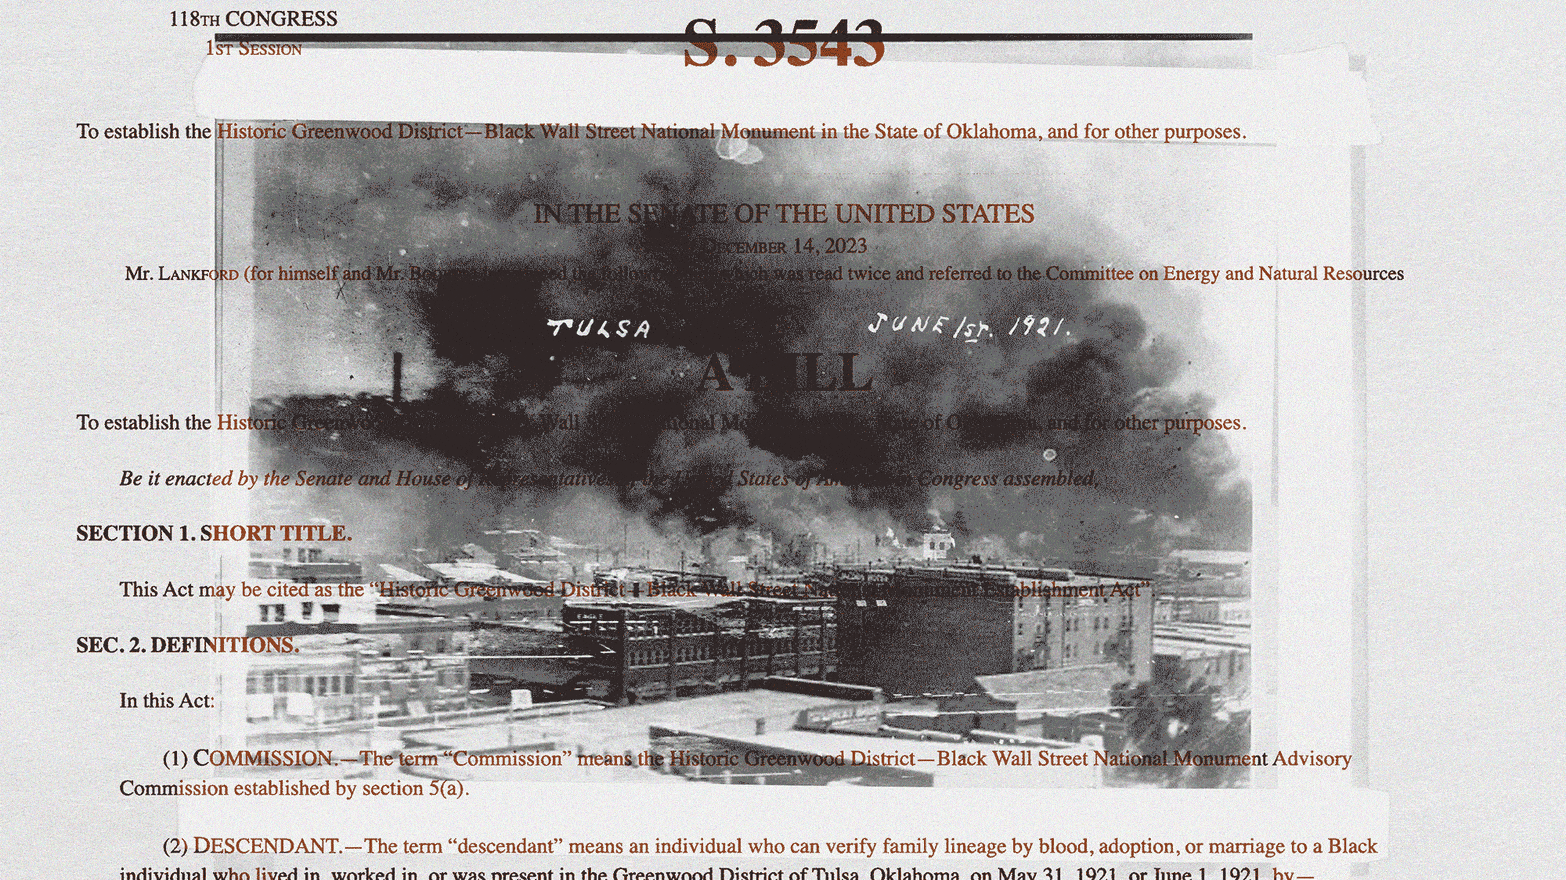 A photo illustration showing images of the Tulsa Race Massacre in 1921 and the current bill to make the Tulsa Race Massacre site a National Monument.